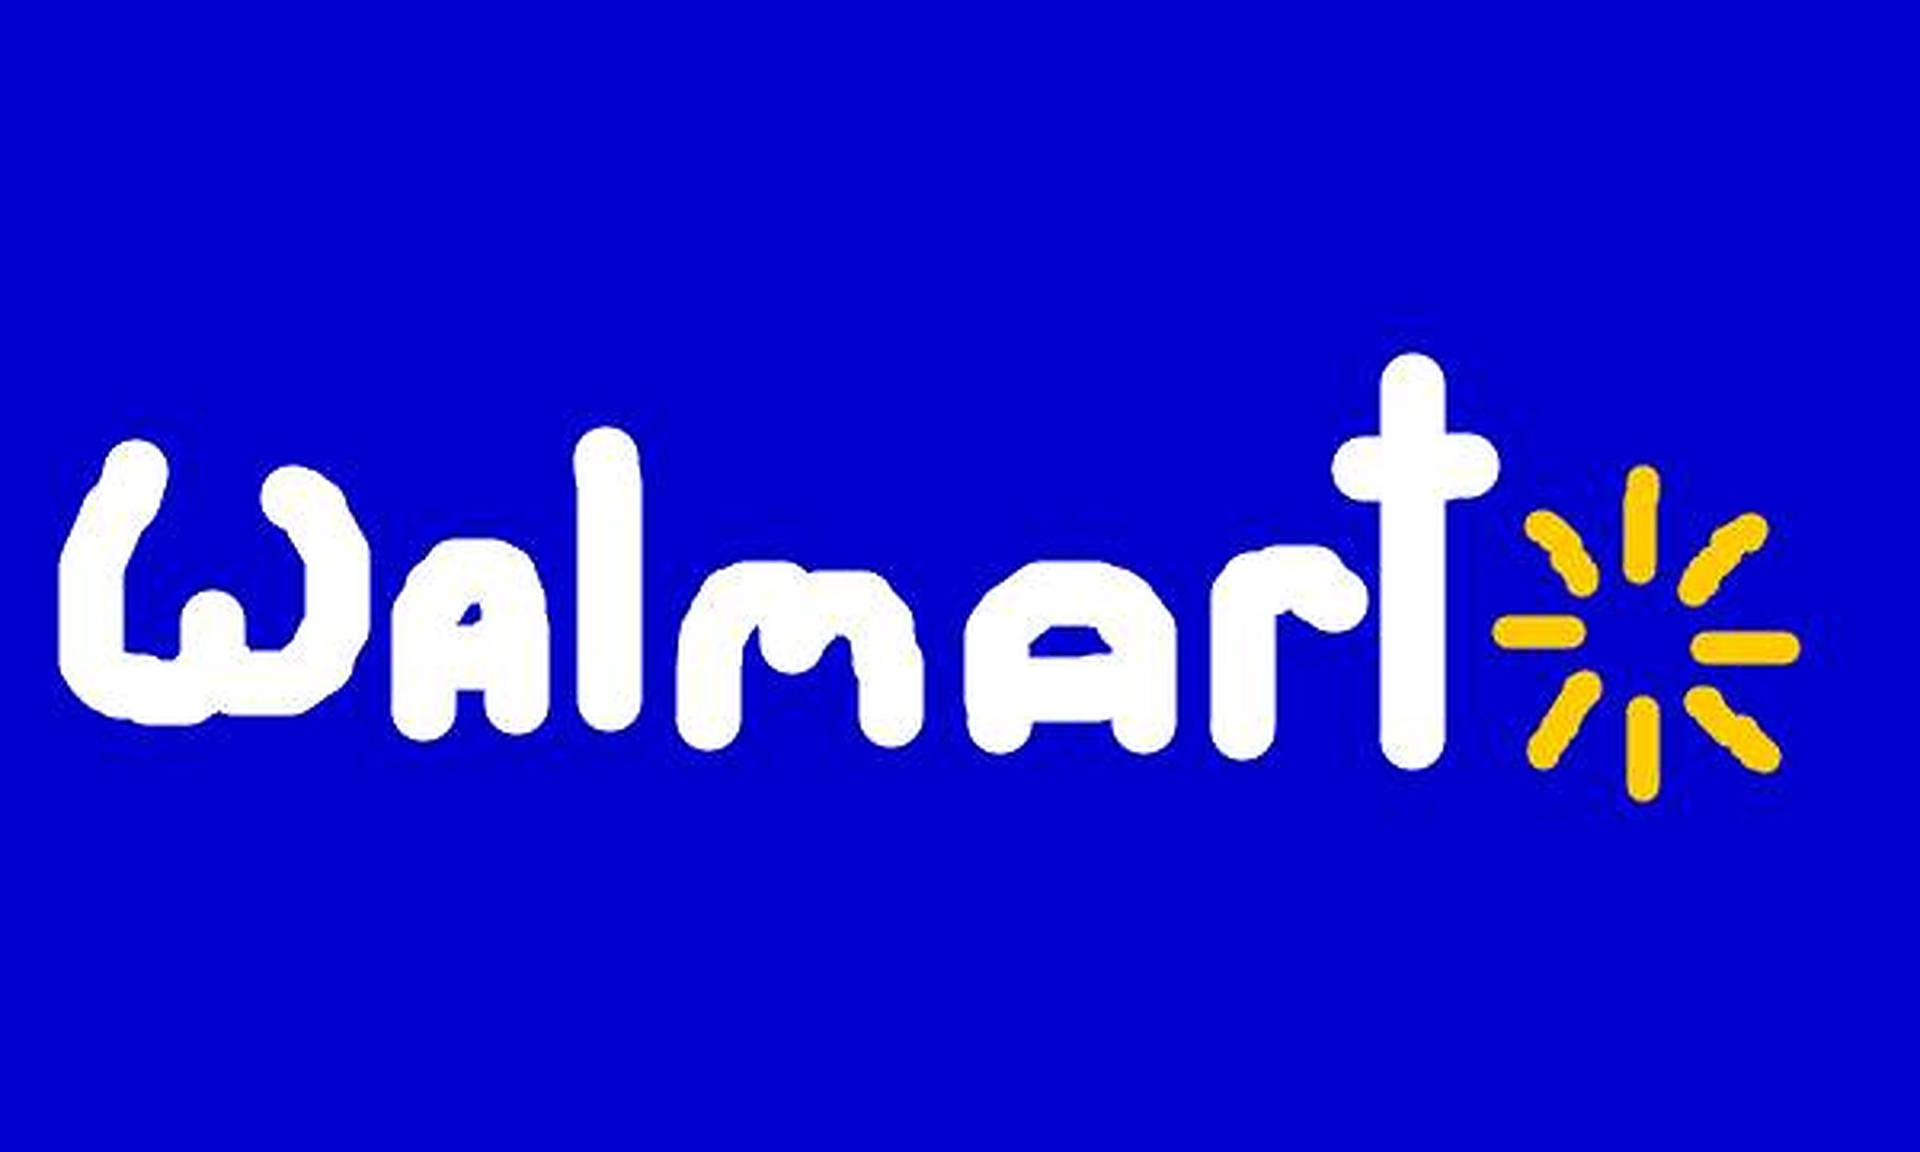 Walmartpaint Art Can Be Translated To 